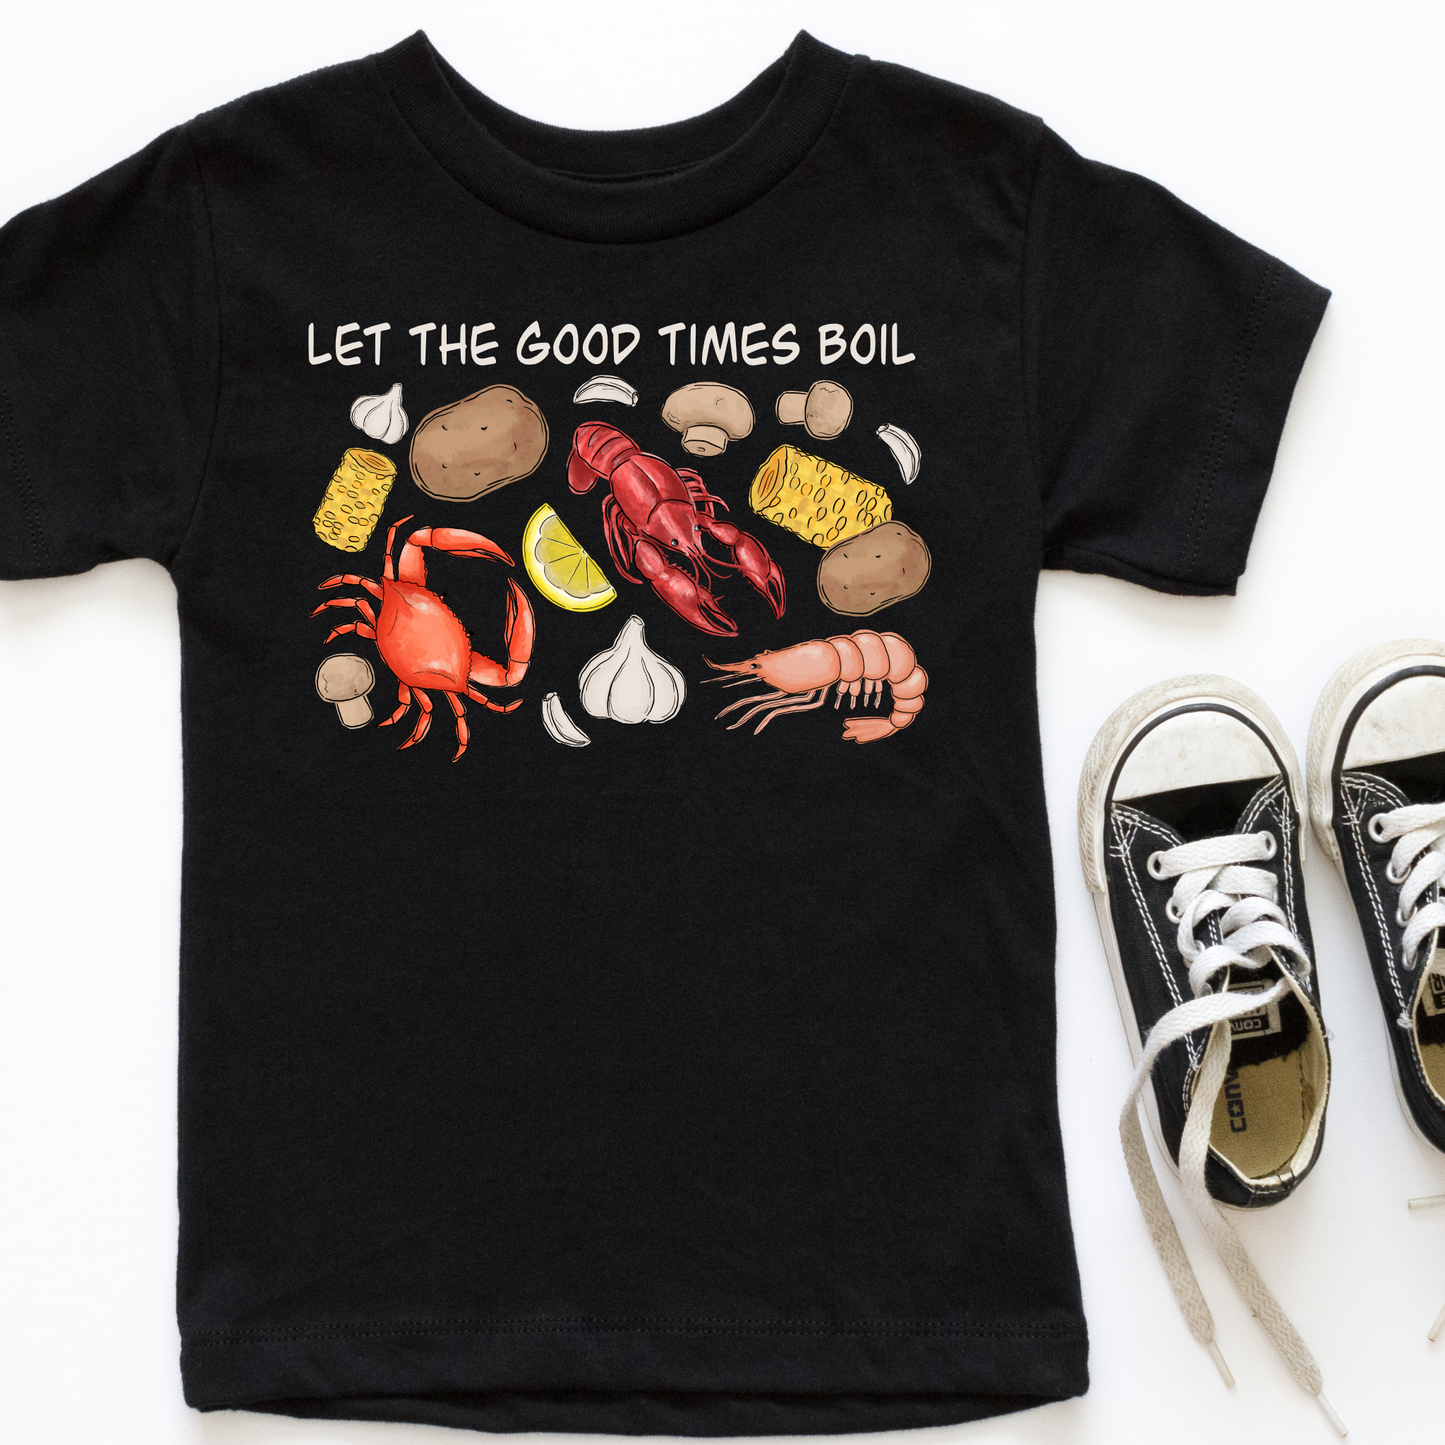 Let the Good Times Boil Crawfish Tee - Toddler - Youth - Adult